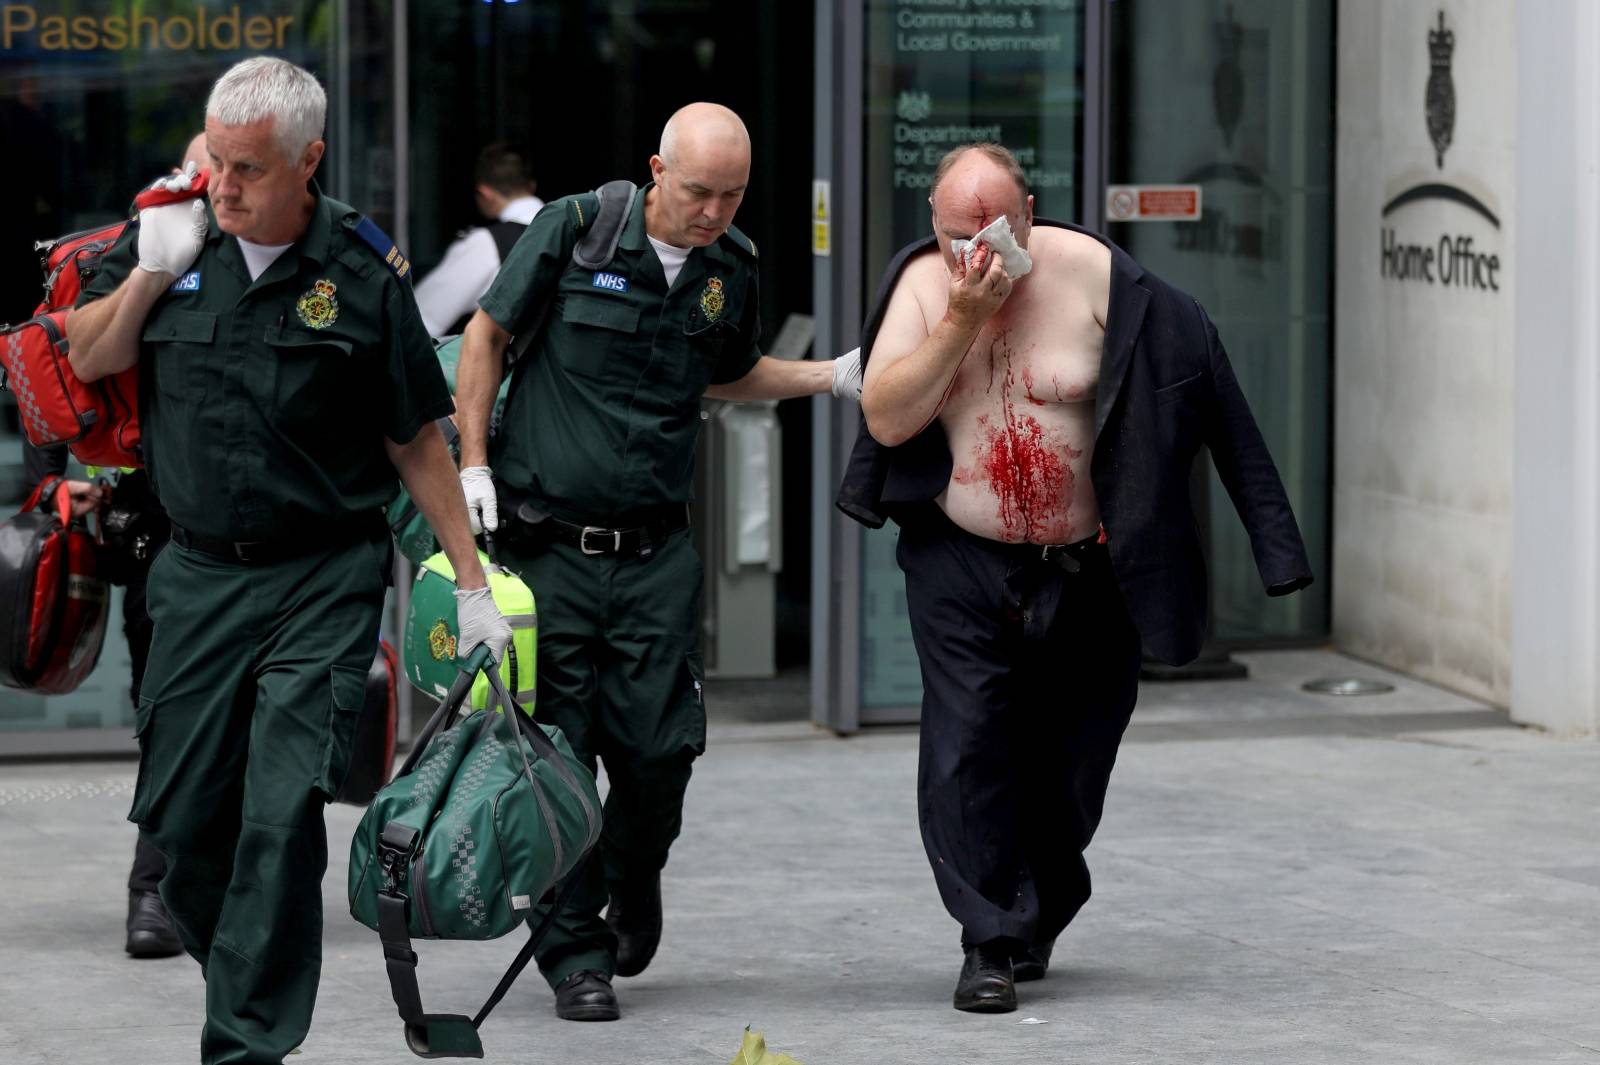 An injured man is helped by a medic outside the Home Office in London